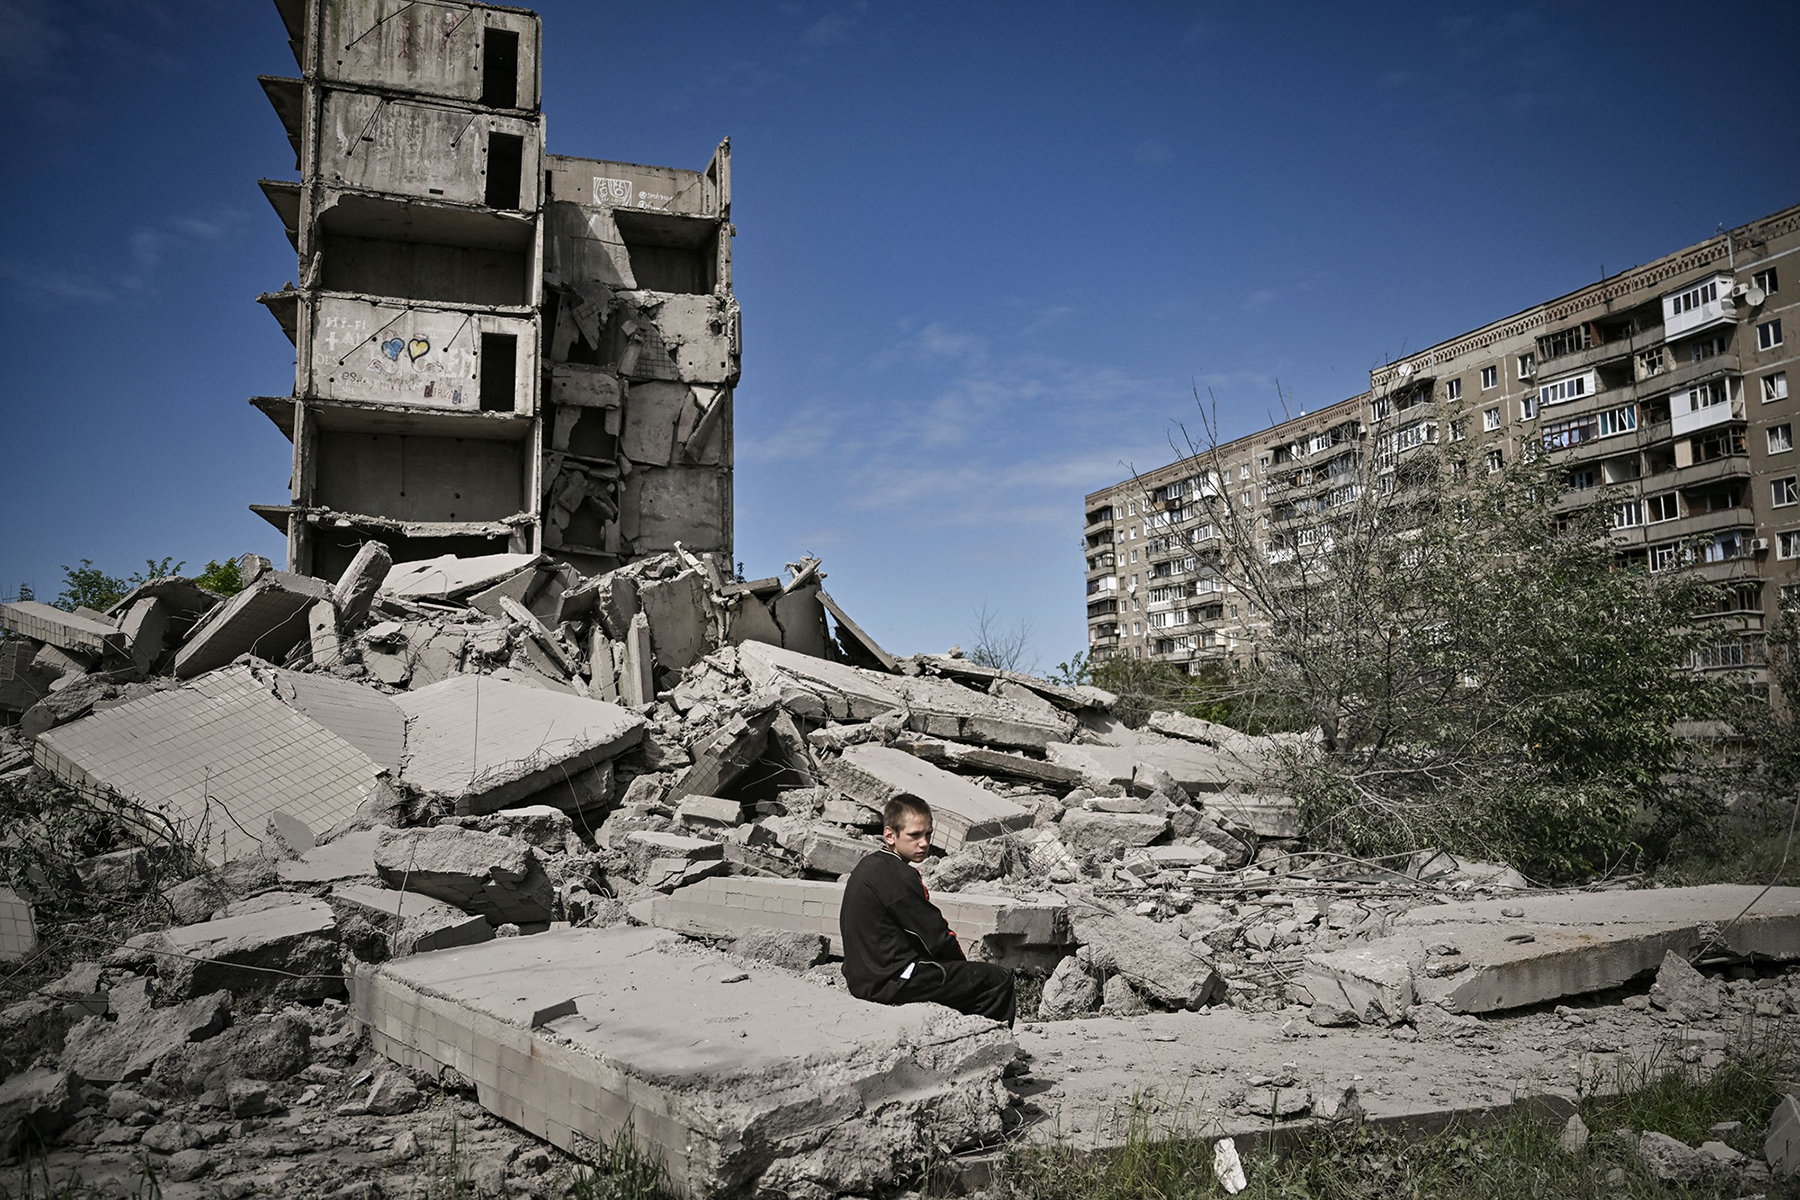 A young boy sits in front of a damaged building after a strike in Kramatorsk in the eastern Ukrainian region of Donbas, on May 25.